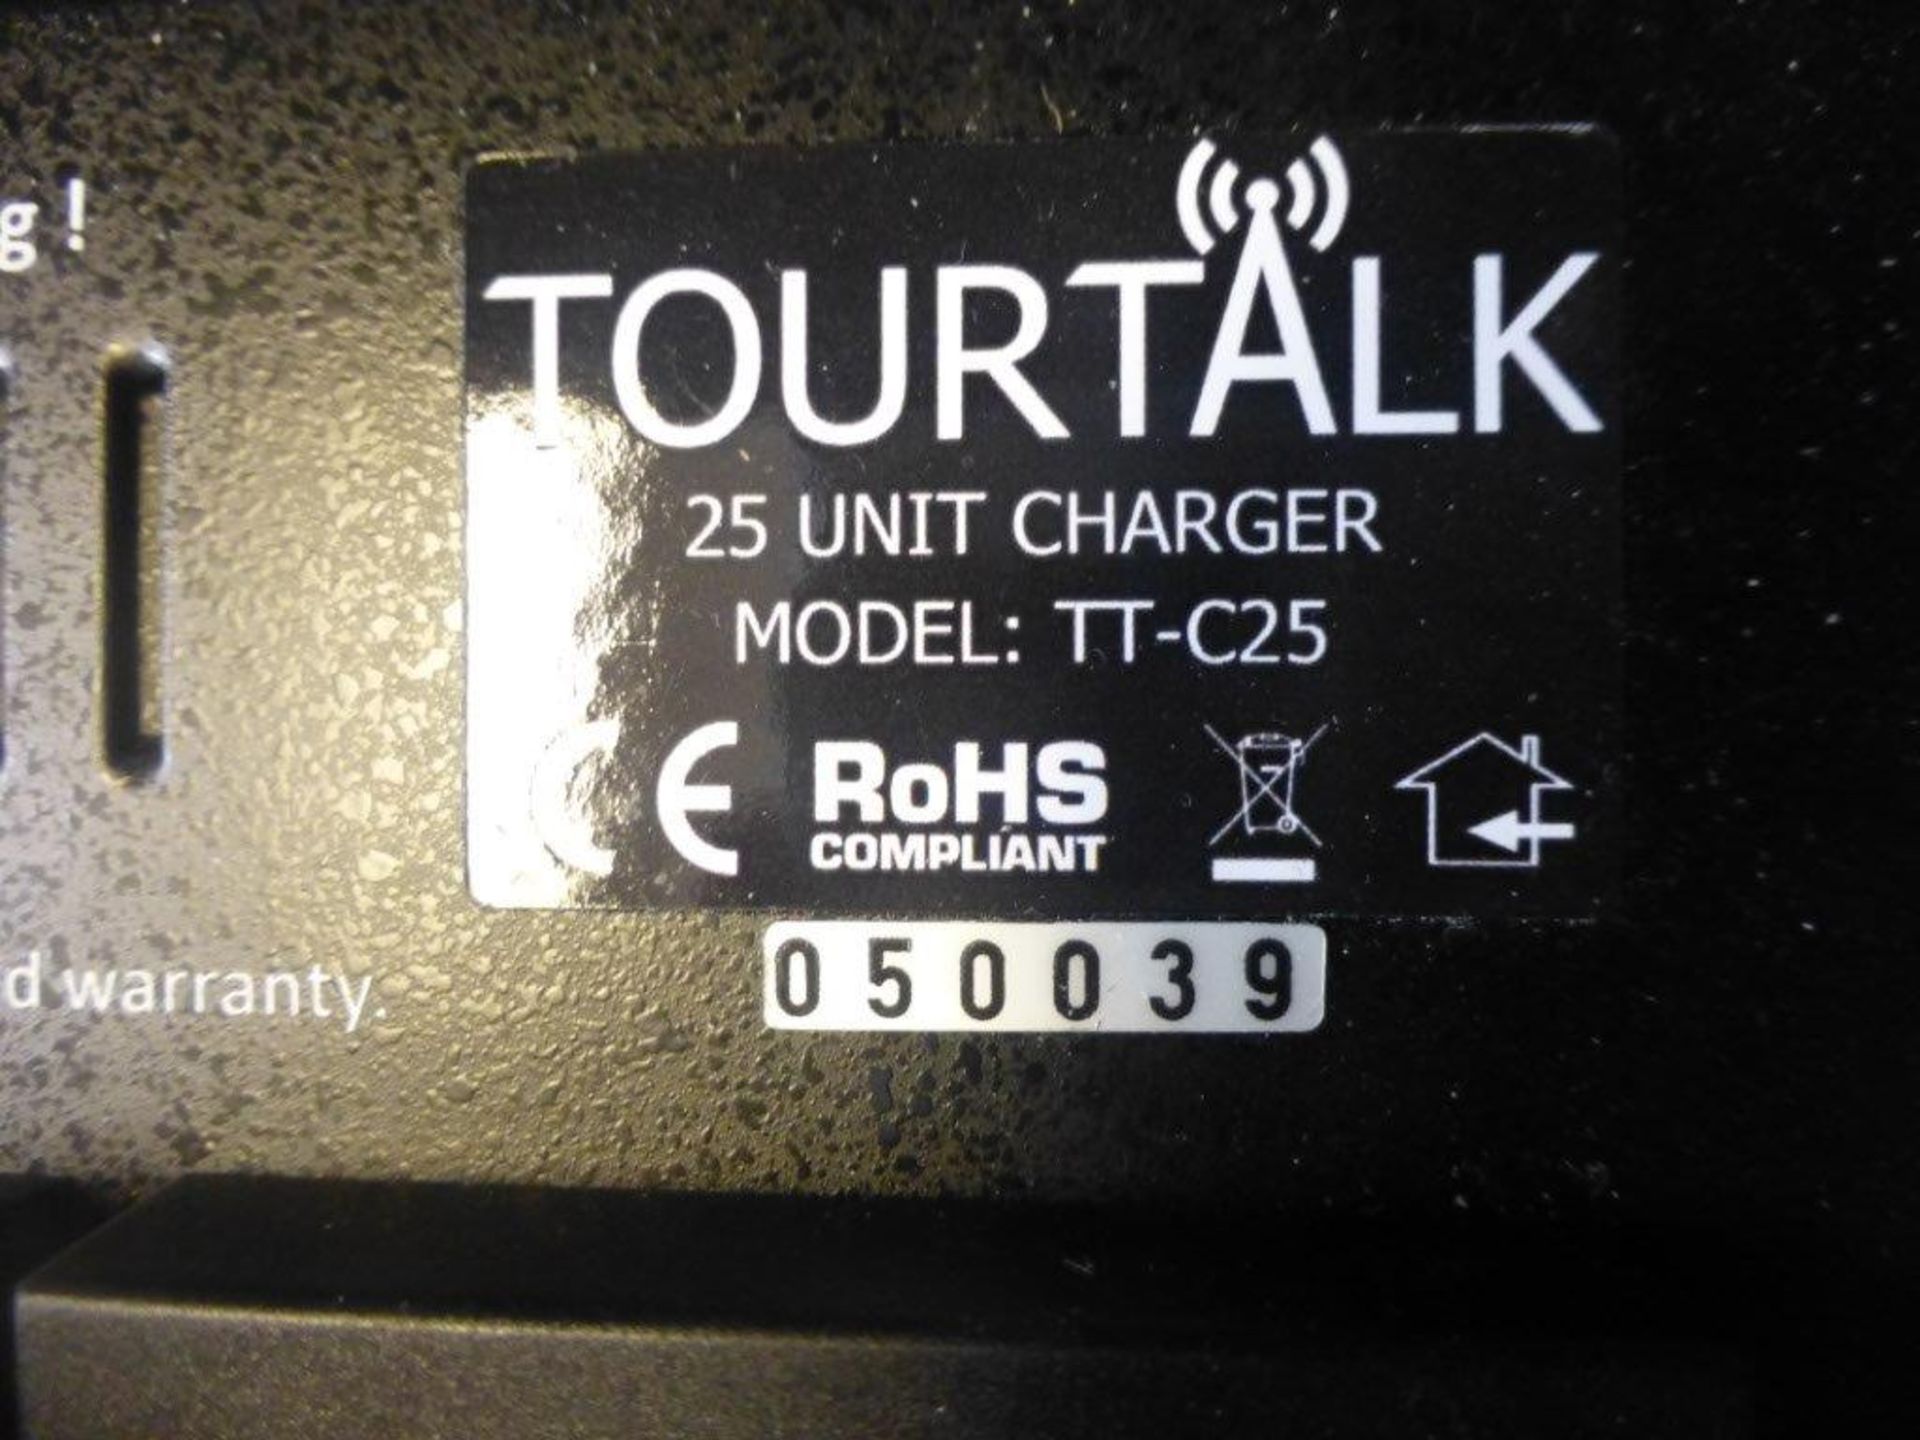 Tourtalk TT-C25 25 station charger, serial No 50039 22 hand held 2-way radios with quantity of - Image 2 of 3